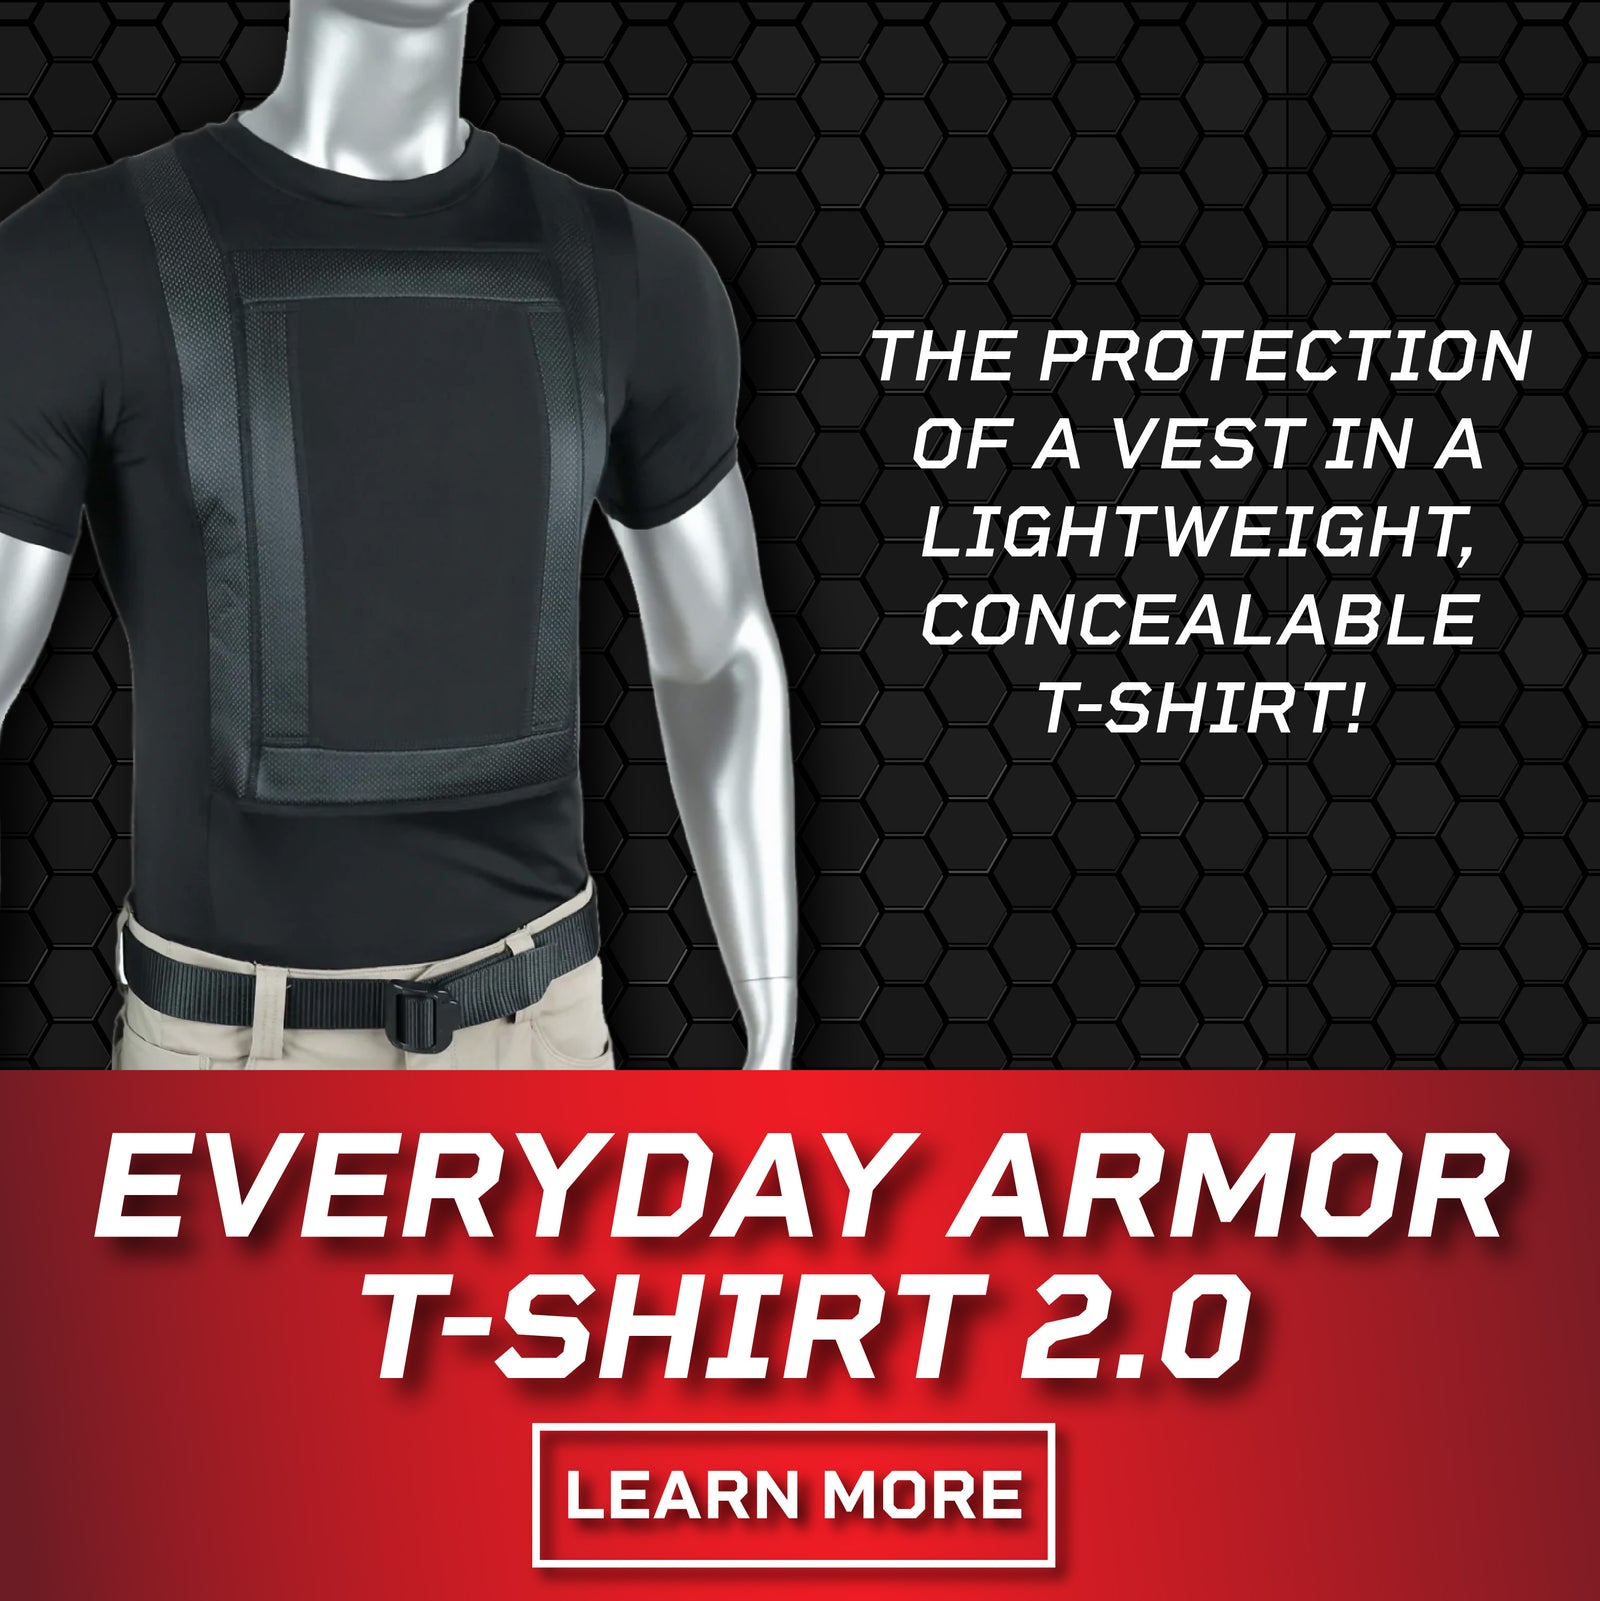 CITIZEN V-SHIELD Ultra Conceal Female Body Armor and Carrier